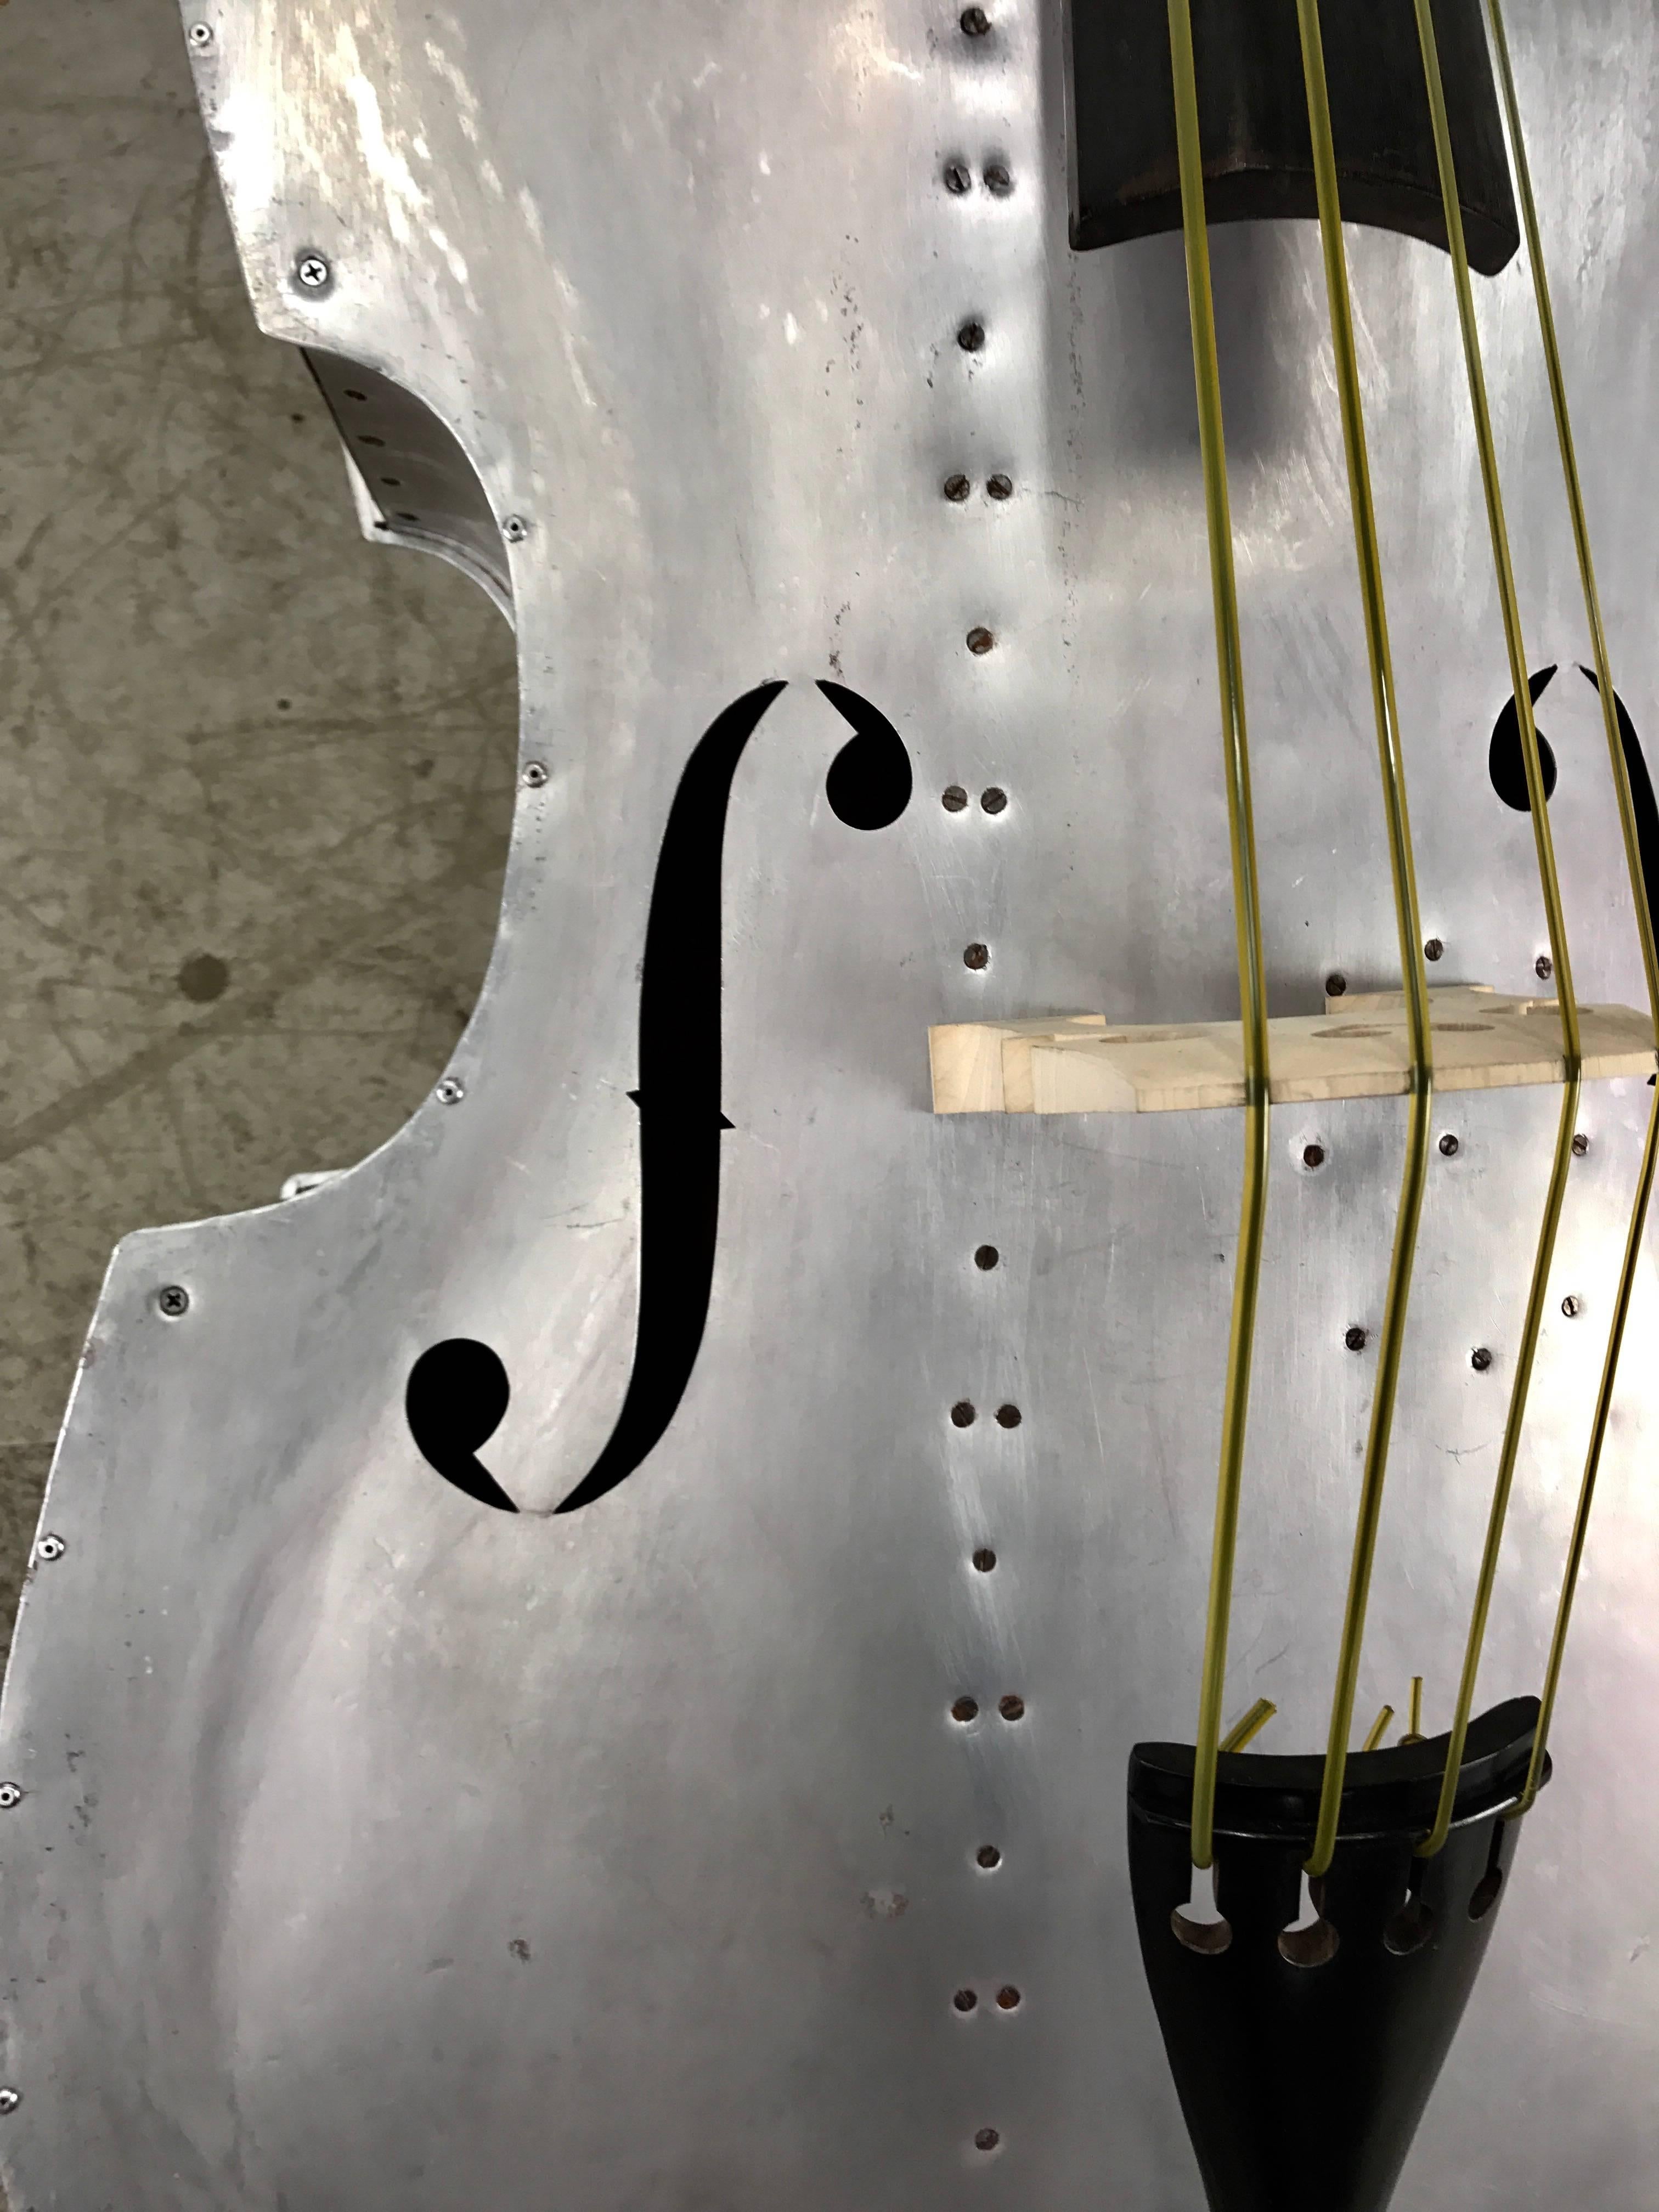 Extremely rare aluminum string bass, circa 1930s, bass was originaly wood grain painted, has been stripped, restrung and set up, new bridge and tail piece, original wood carved headstock missing scroll original ebony fret board, Sounds amazing. If